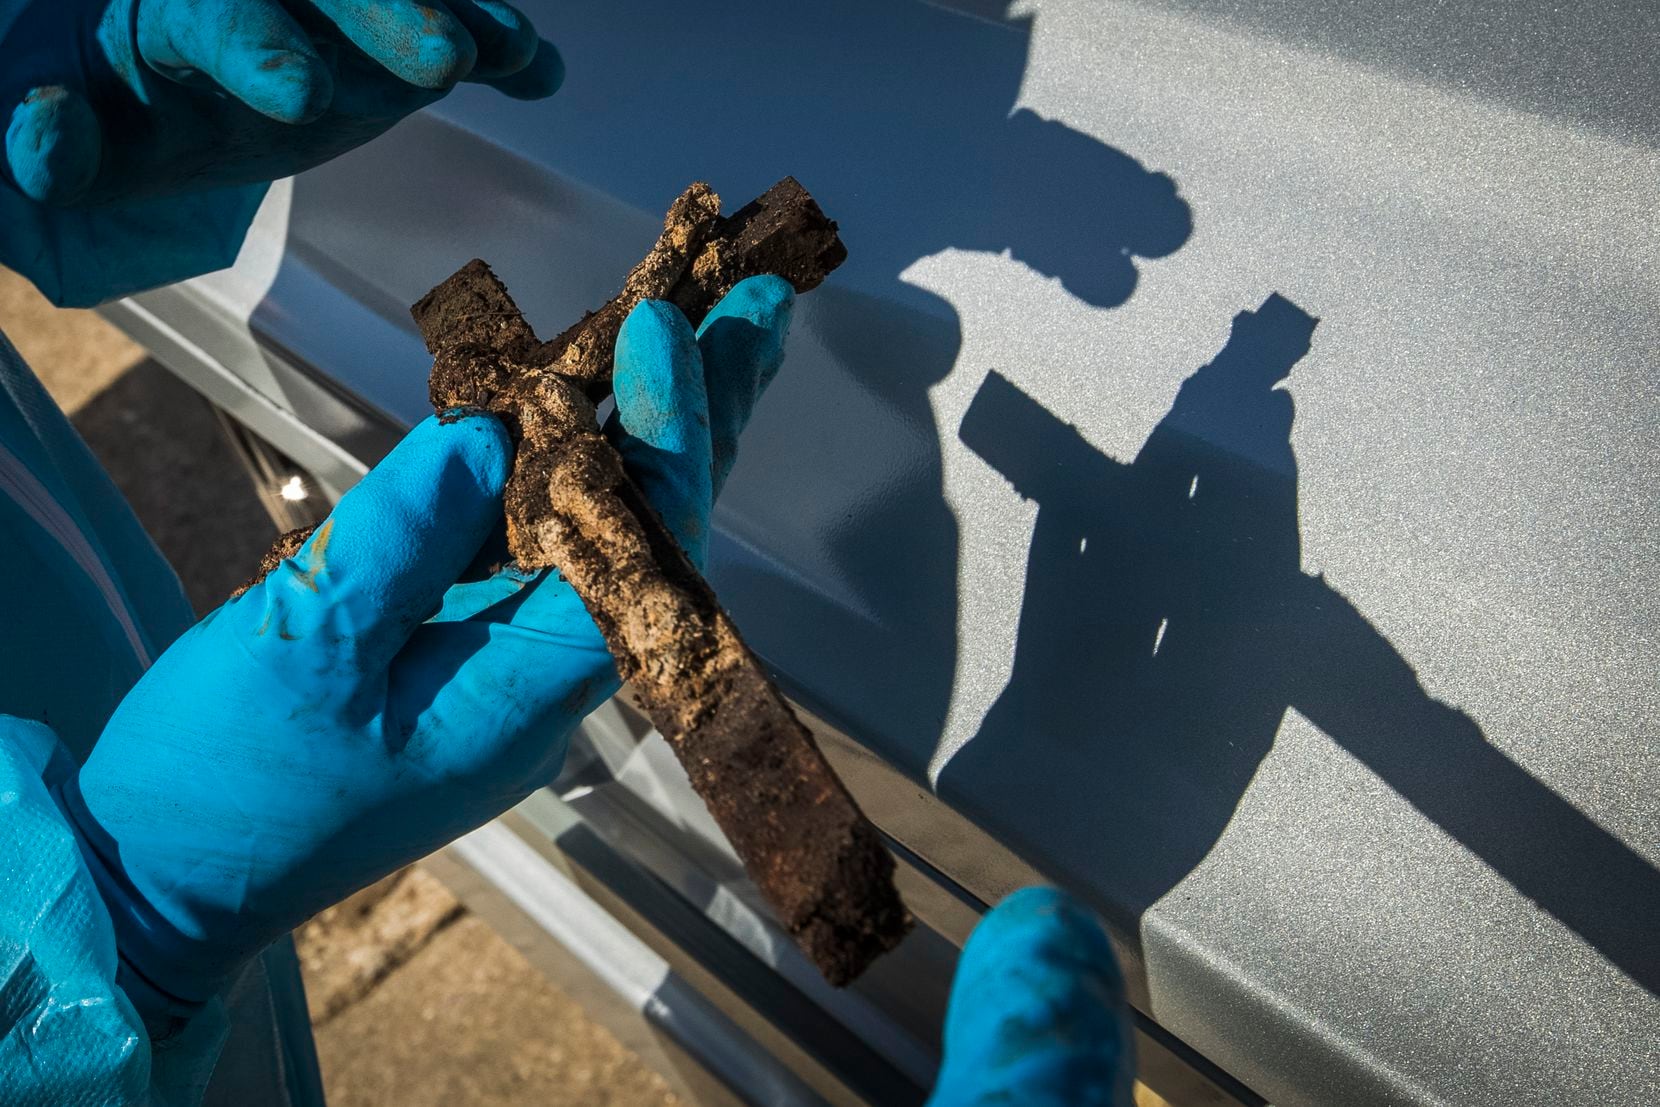 Funeral director Chris Taylor found this crucifix still intact inside the casket of the Rev. Damian Szodenyi, who was buried with it in 1998.  